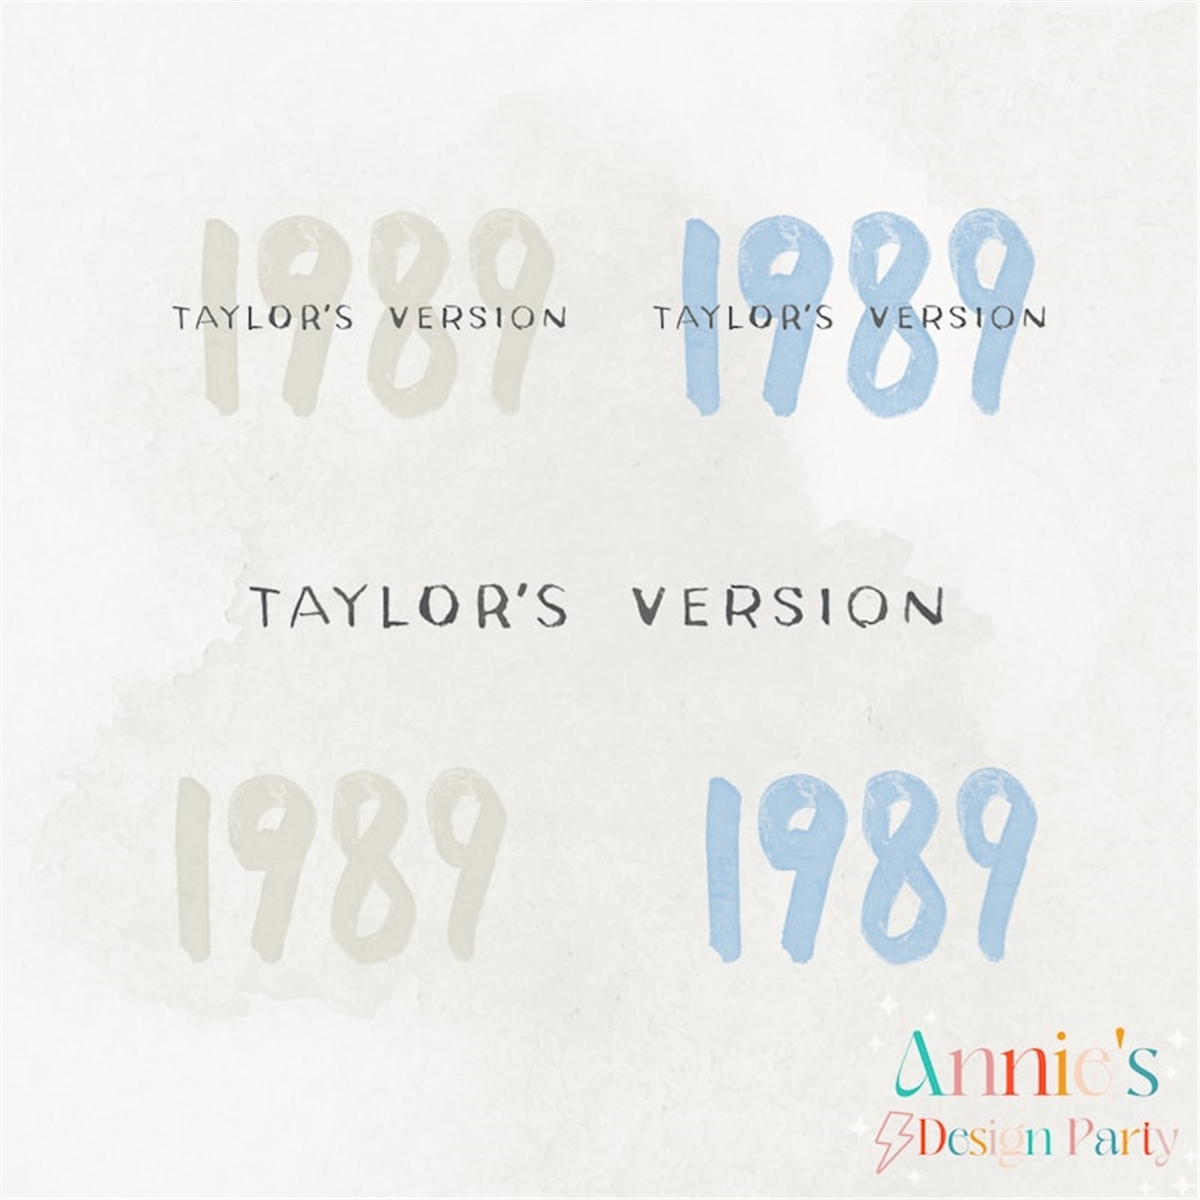 1989-taylors-version-logo-png-1989-tv-png-1989-png-the-image-1